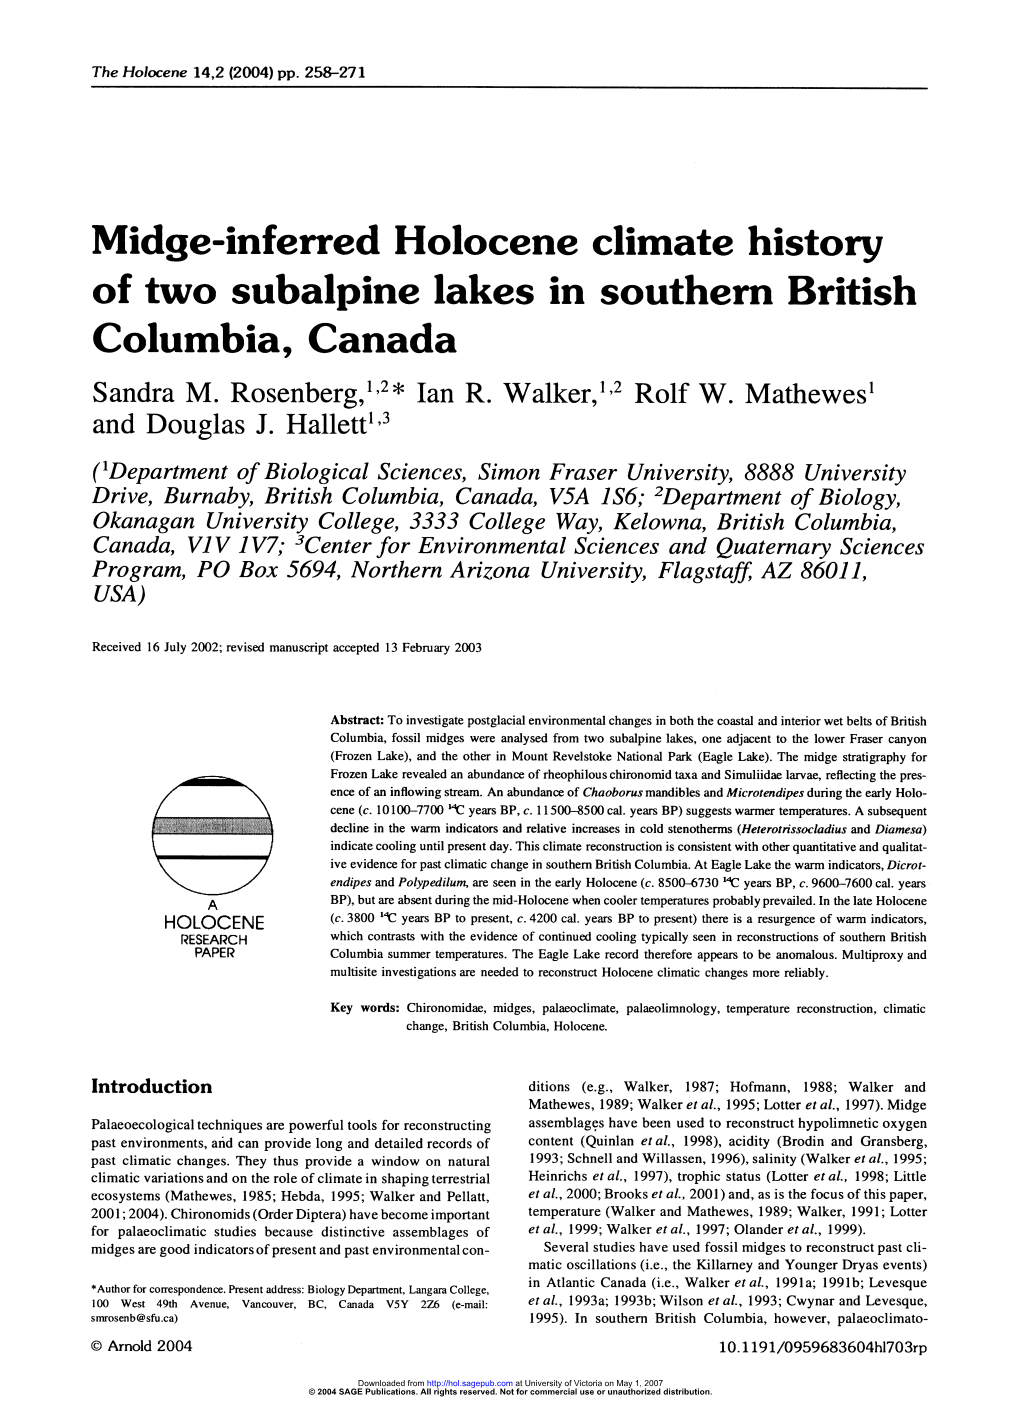 Midge-Inferred Holocene Climate History of Two Subalpine Lakes in Southern British Columbia, Canada